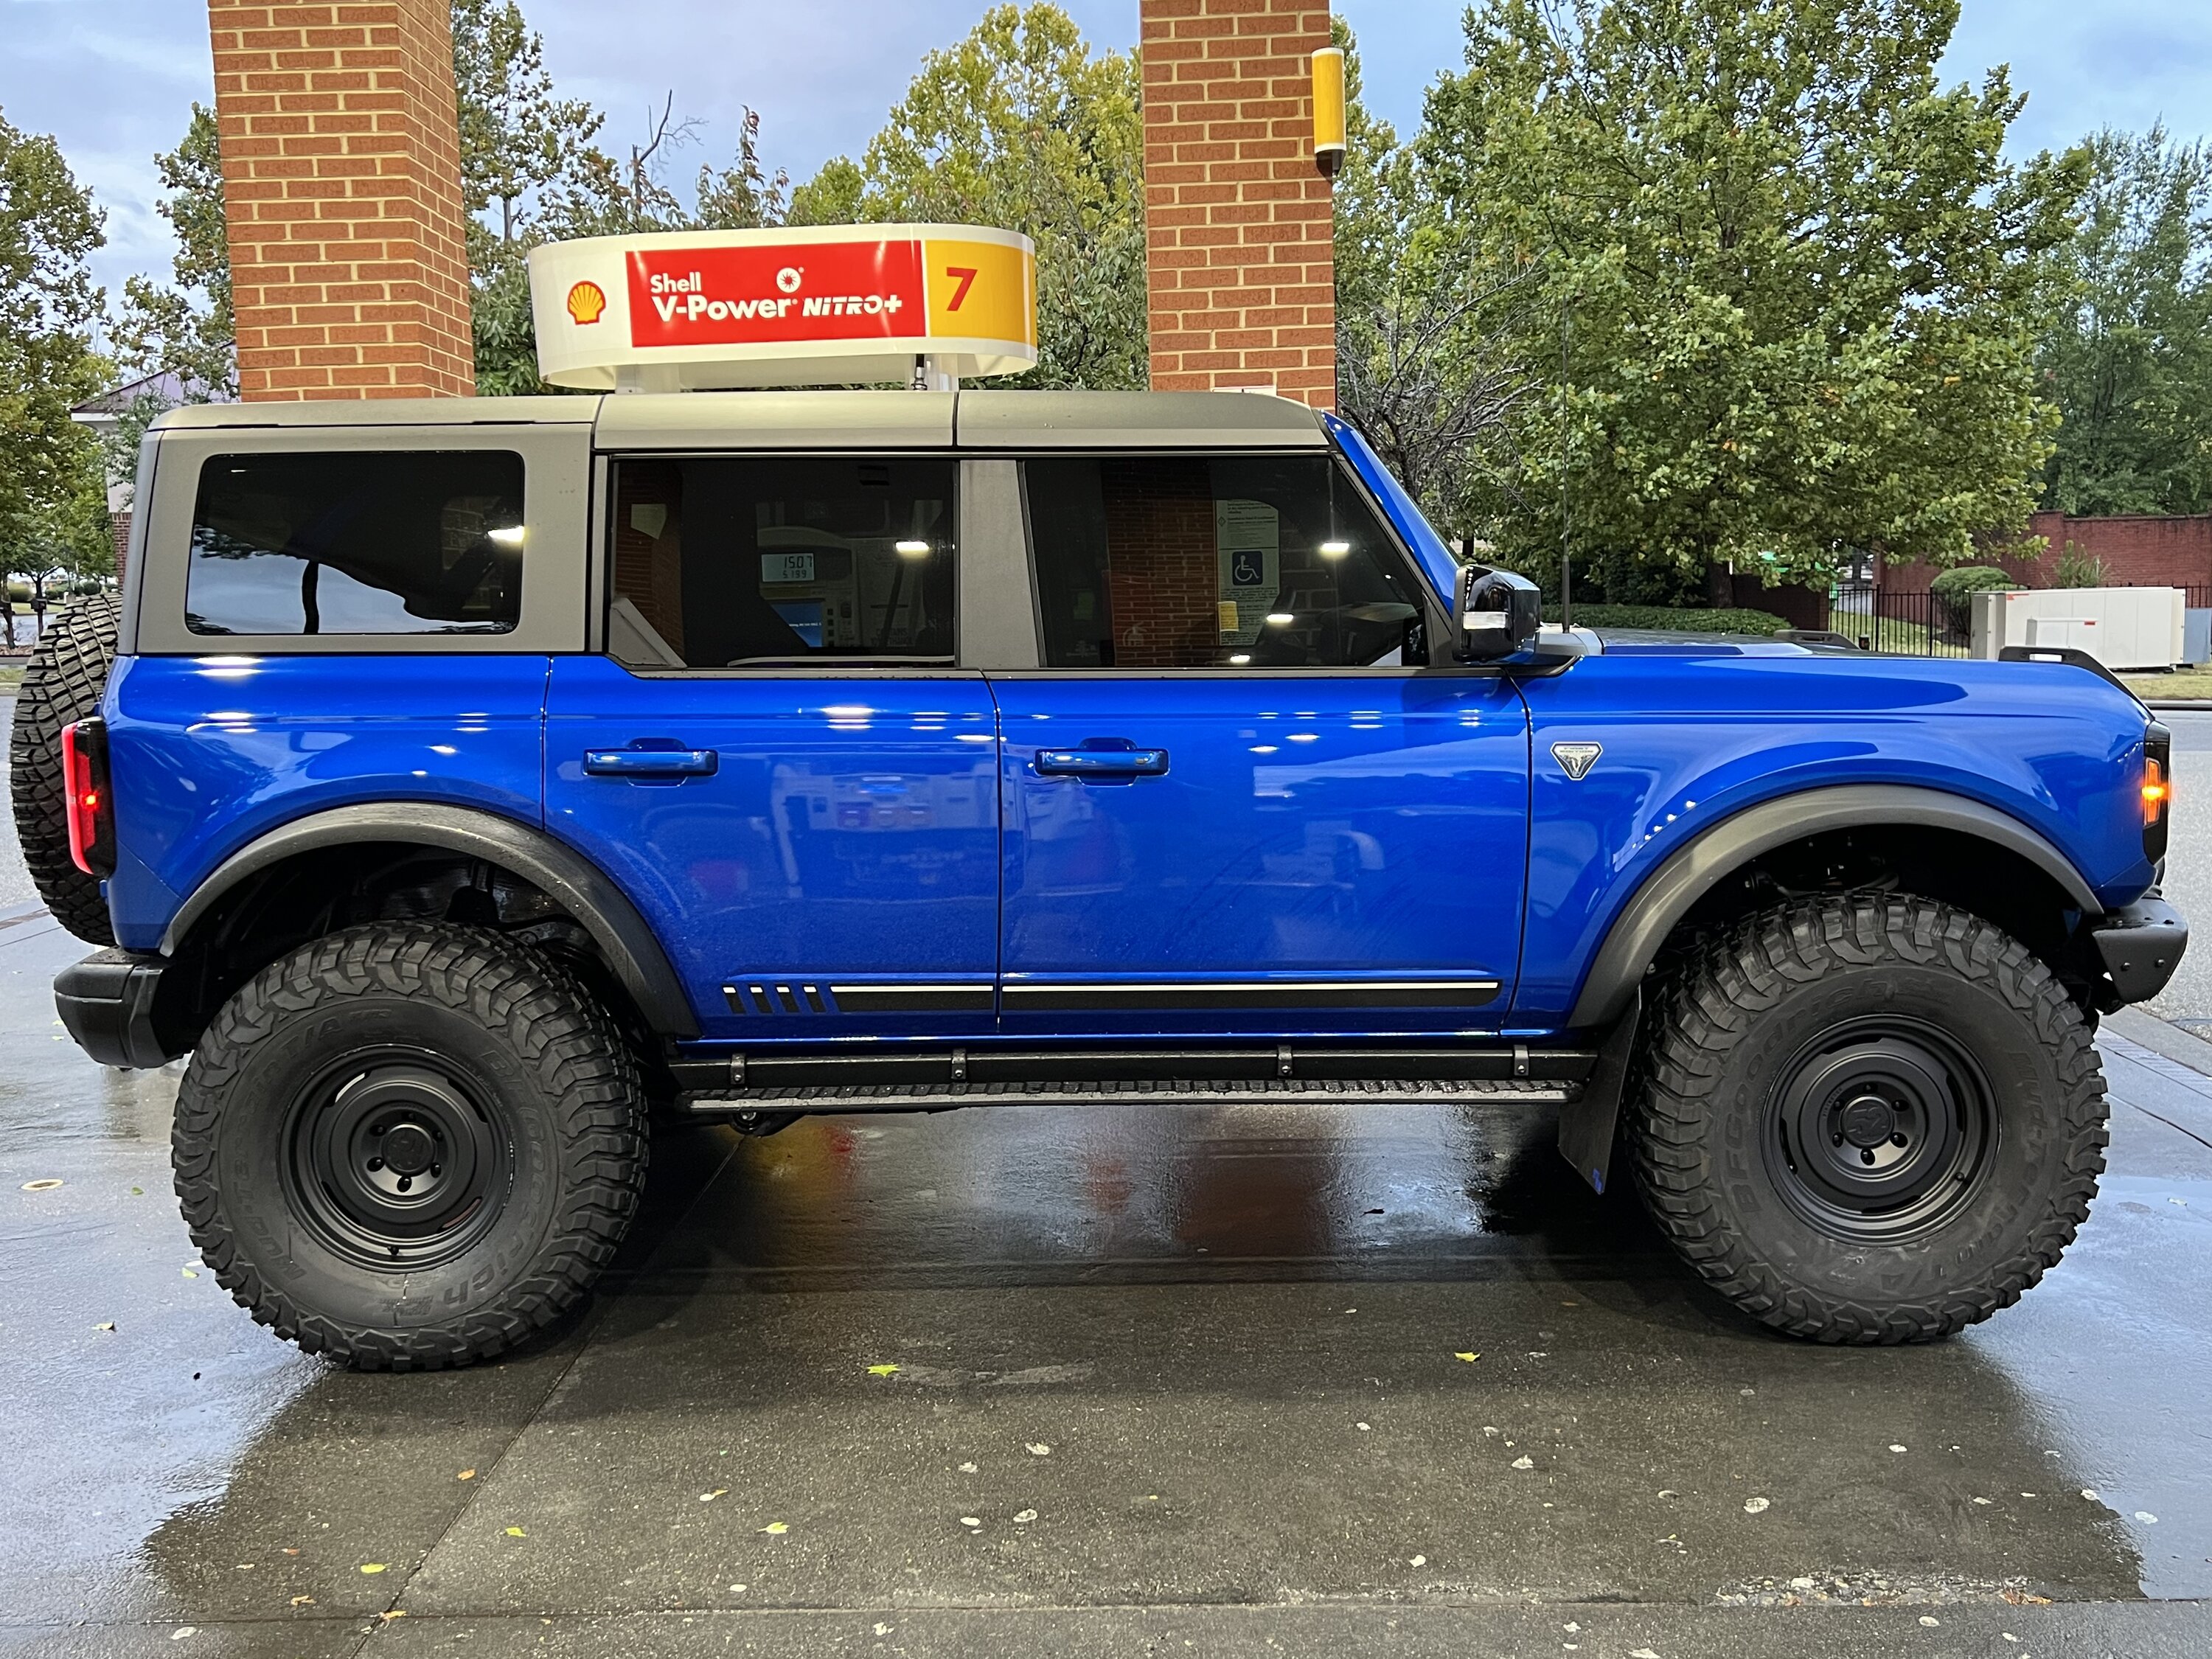 Ford Bronco Show us your installed wheel / tire upgrades here! (Pics) B8D295DC-983D-48AC-8AE0-9F3850A8915E